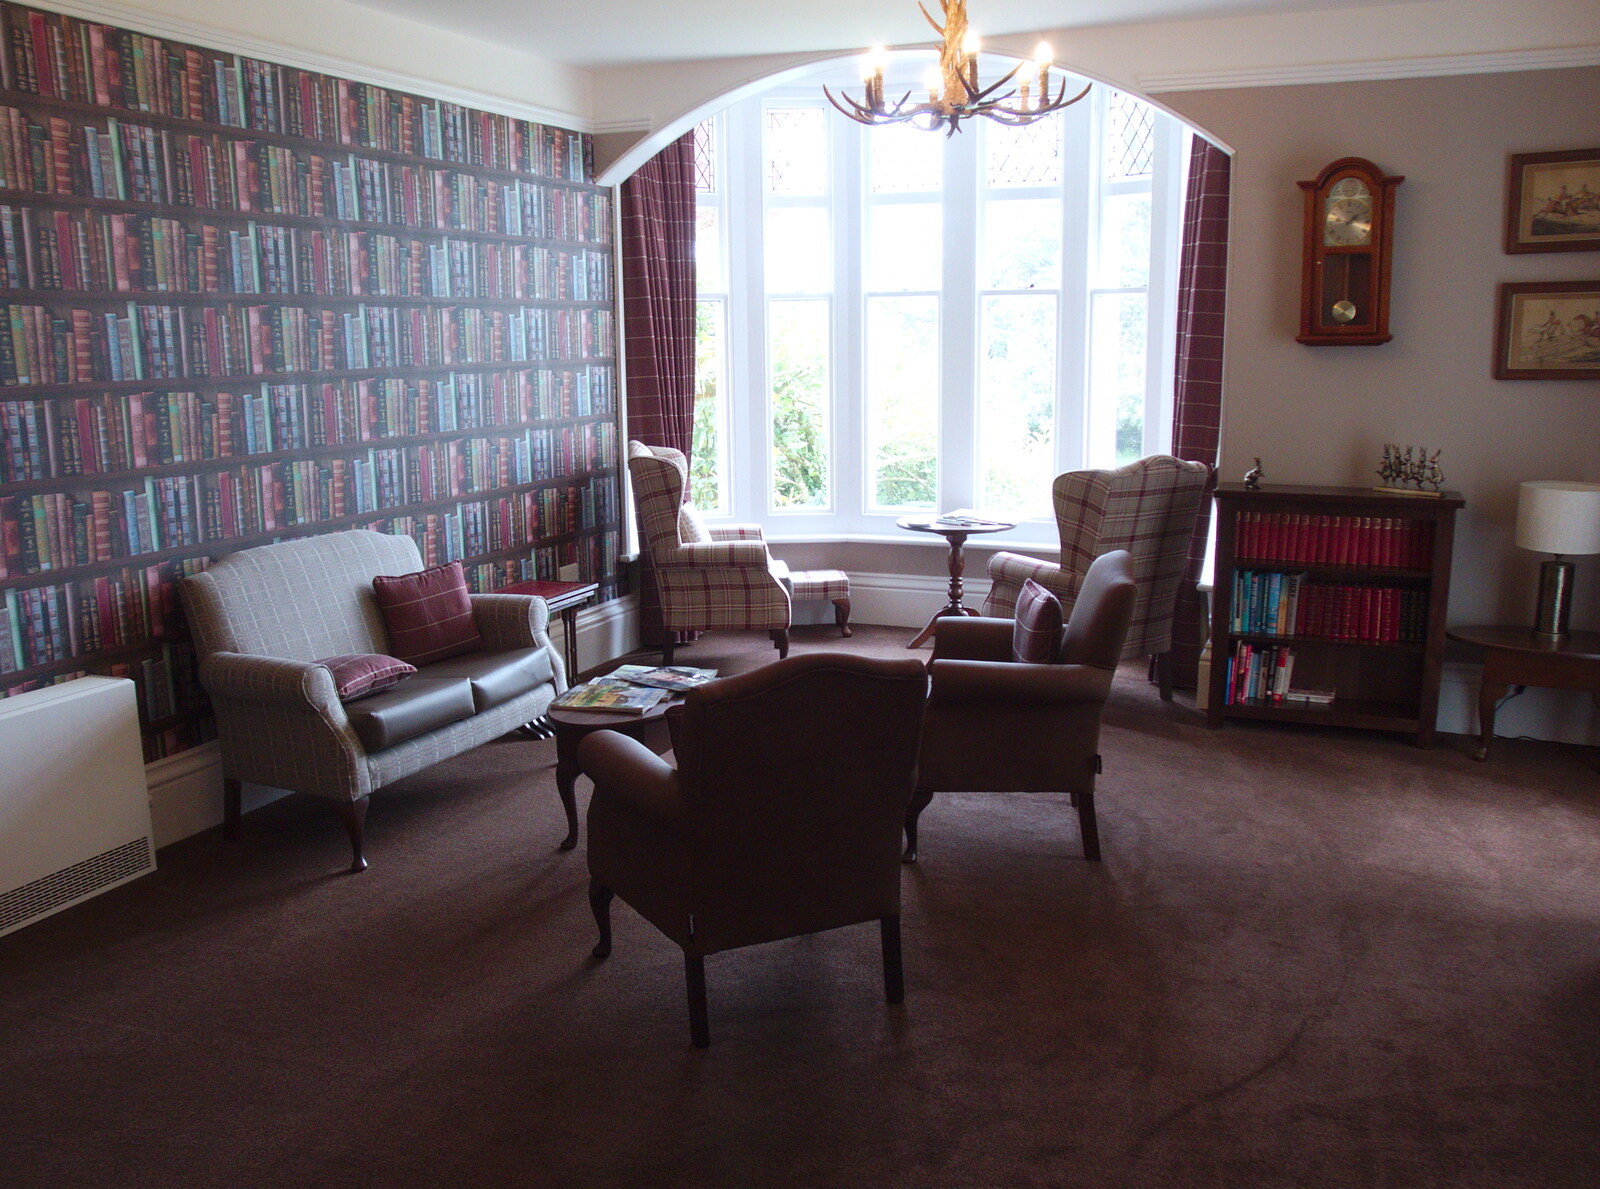 The library room from The Tom Cobley and a Return to Haytor, Bovey Tracey, Devon - 27th May 2019